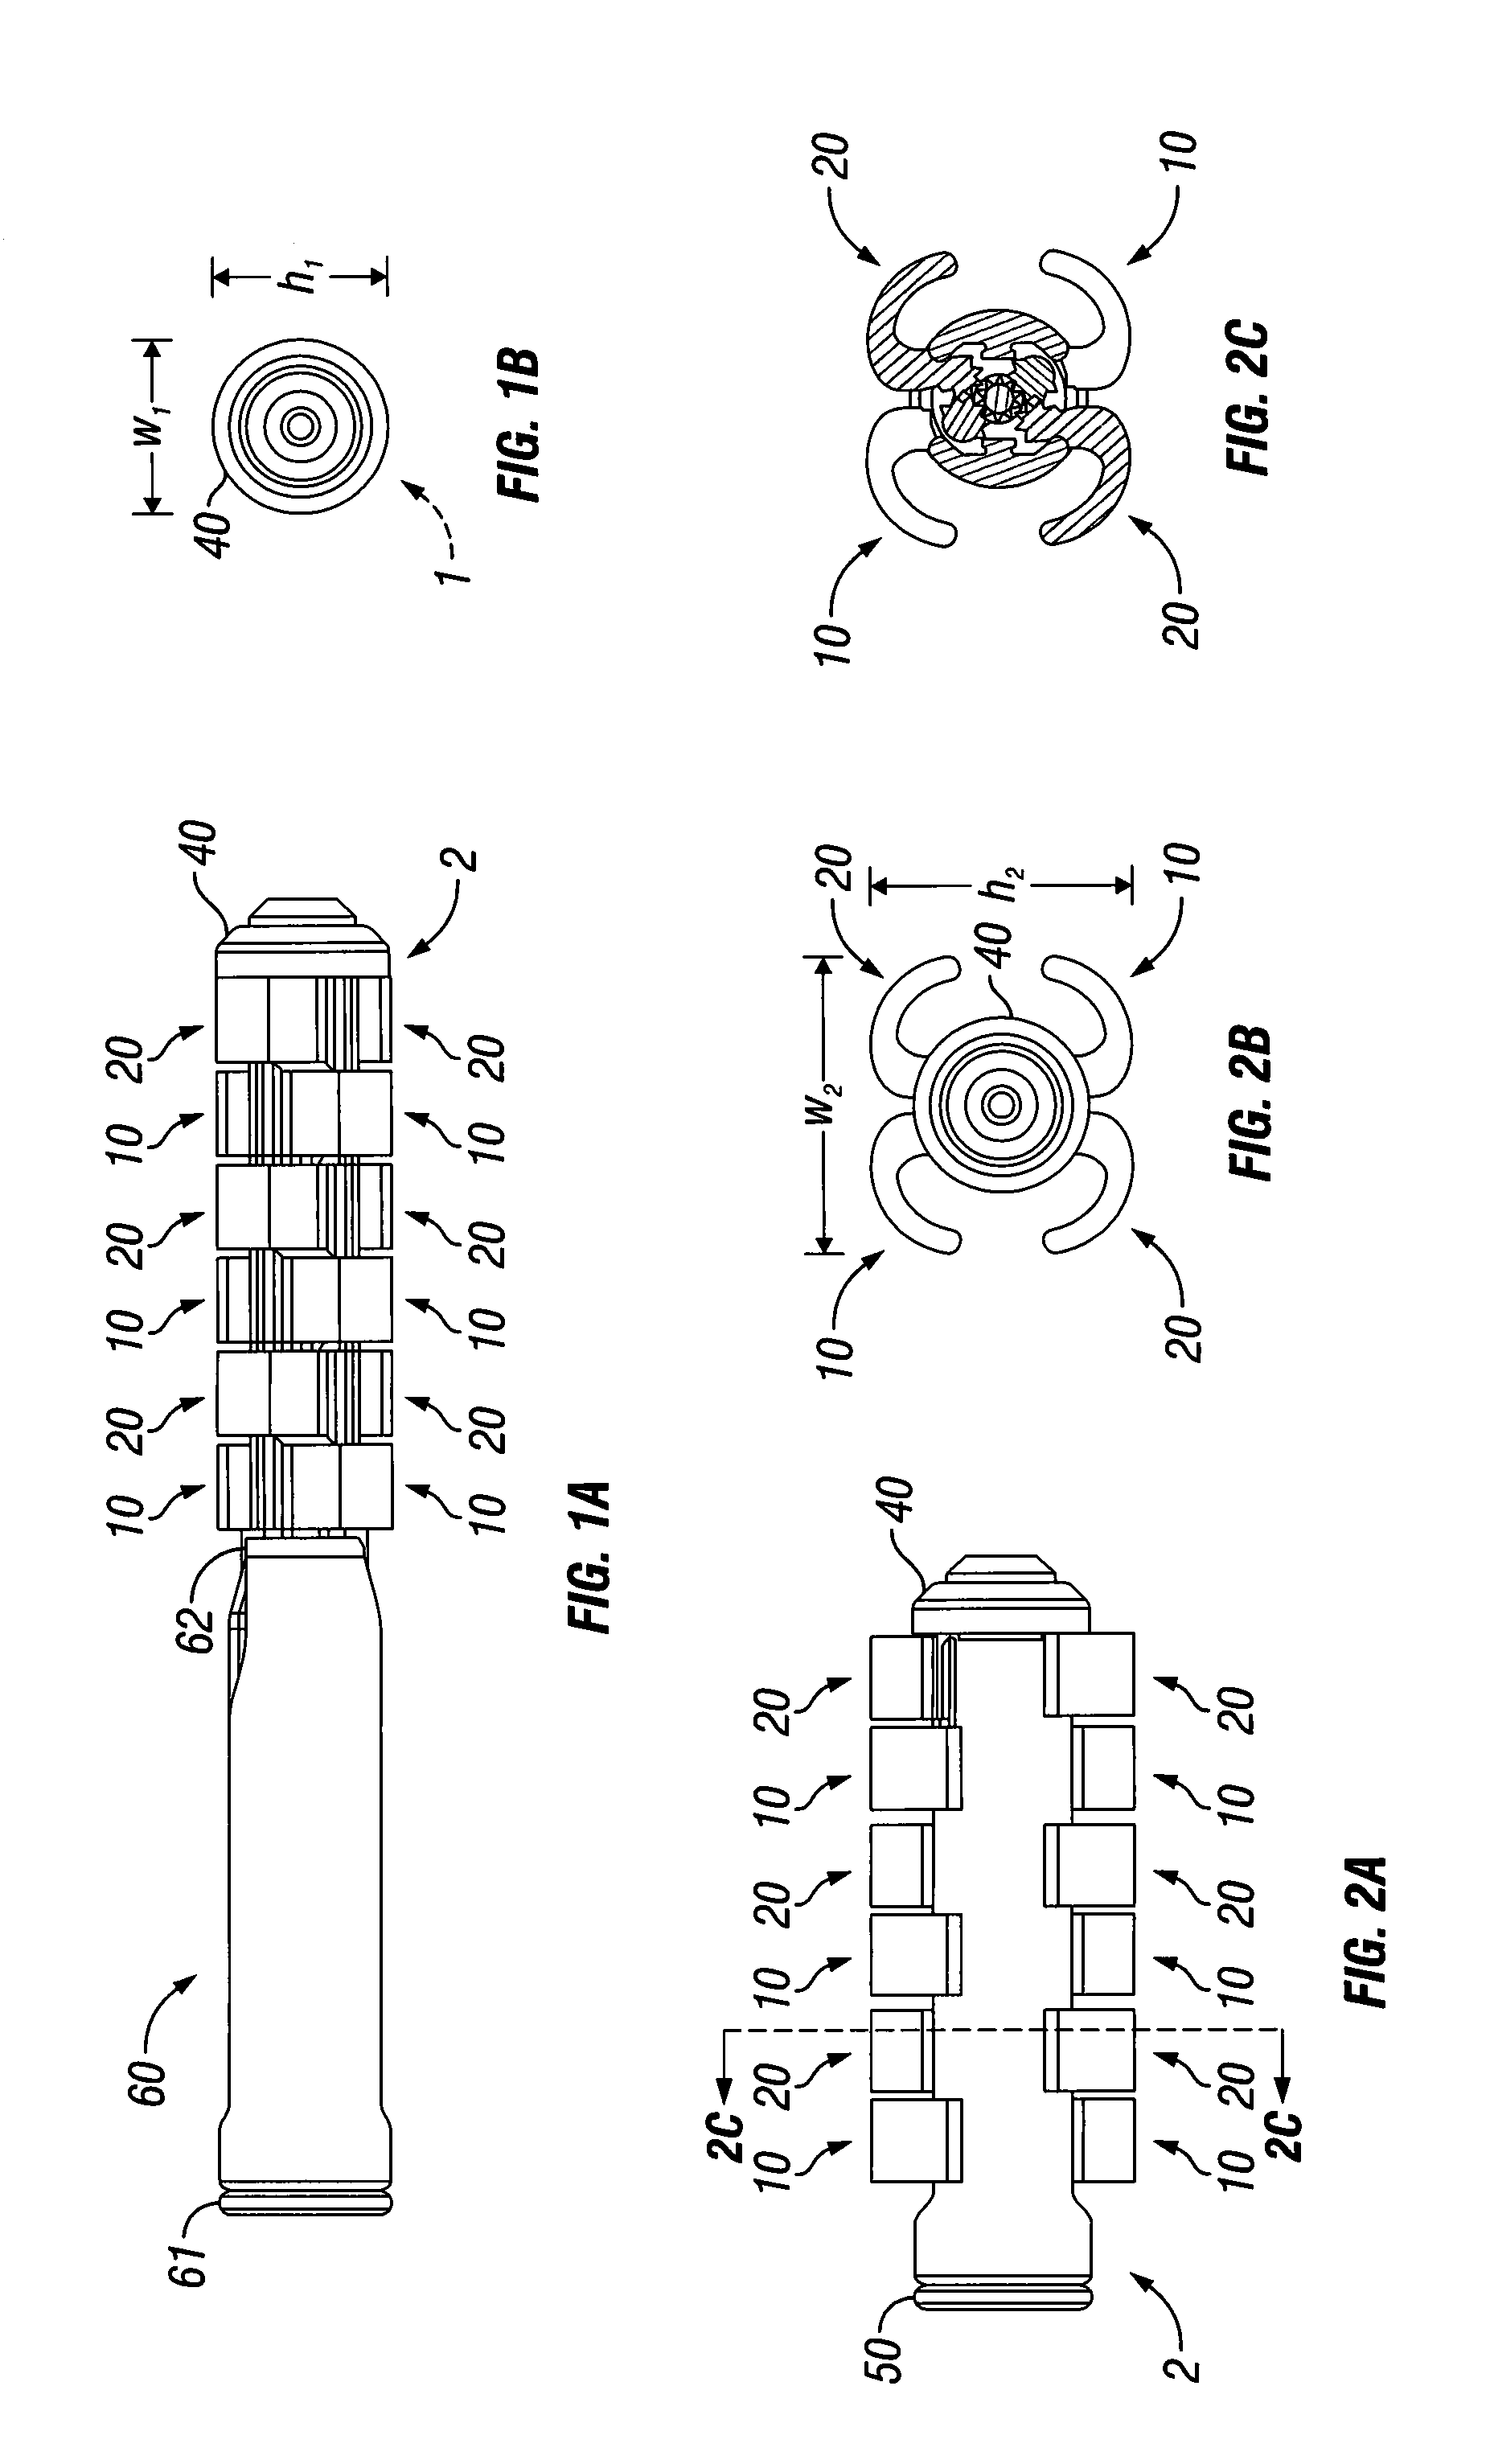 Expandable intervertebral spacer and method of posterior insertion thereof